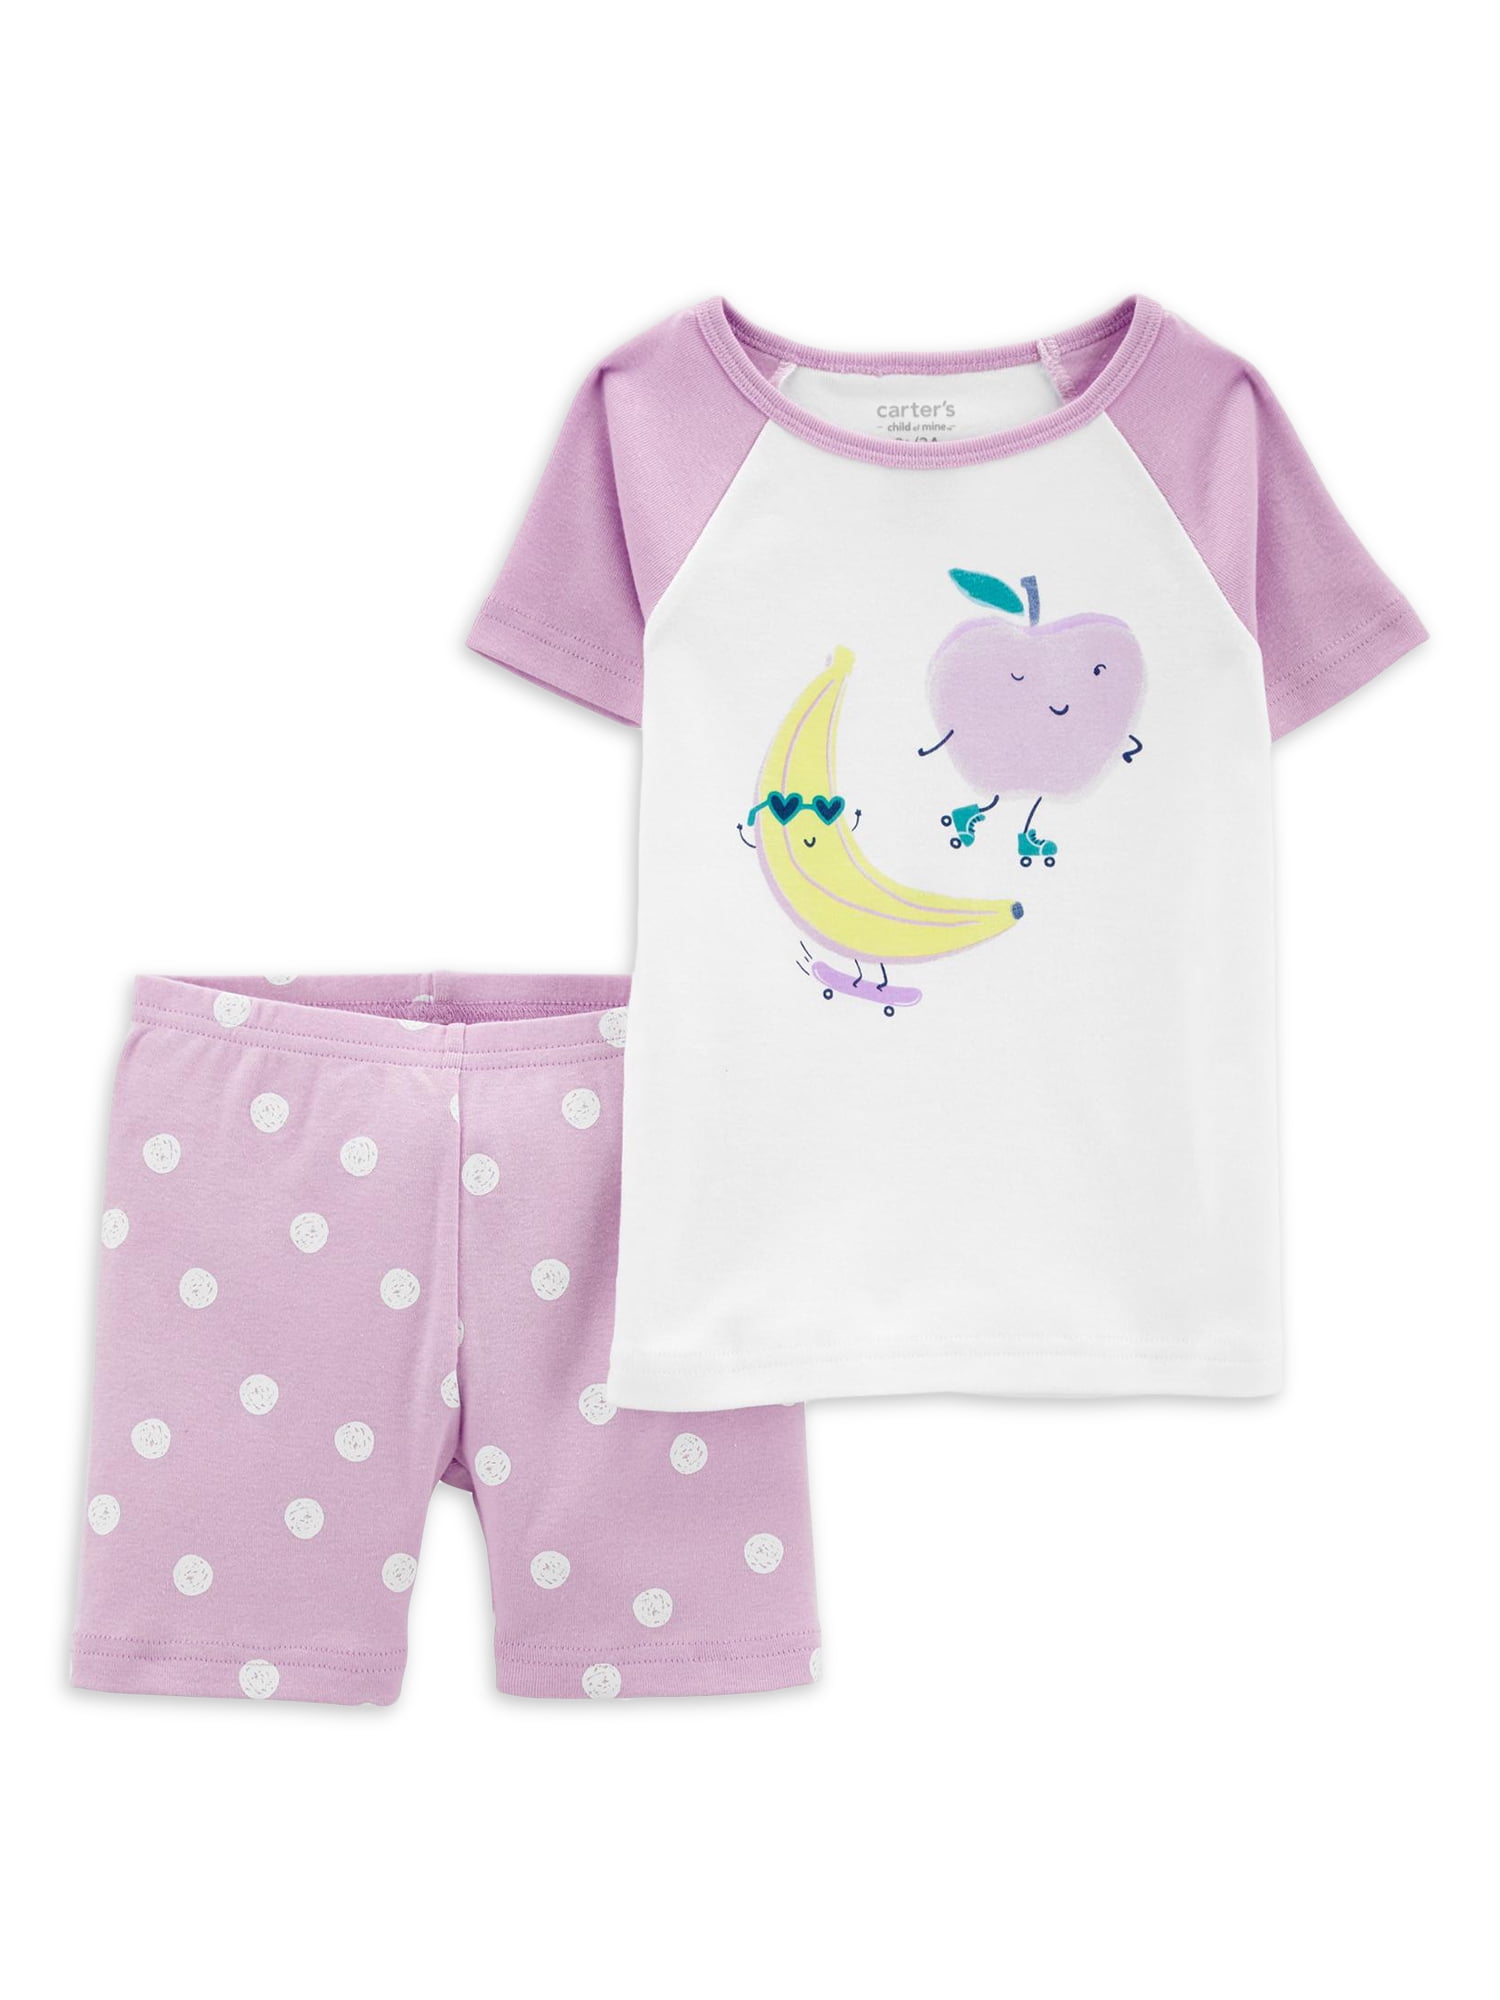 Carter's Child of Mine Toddler Girl Cotton Top and Shorts Pajama Set, 2-Piece, Sizes 12M-5T